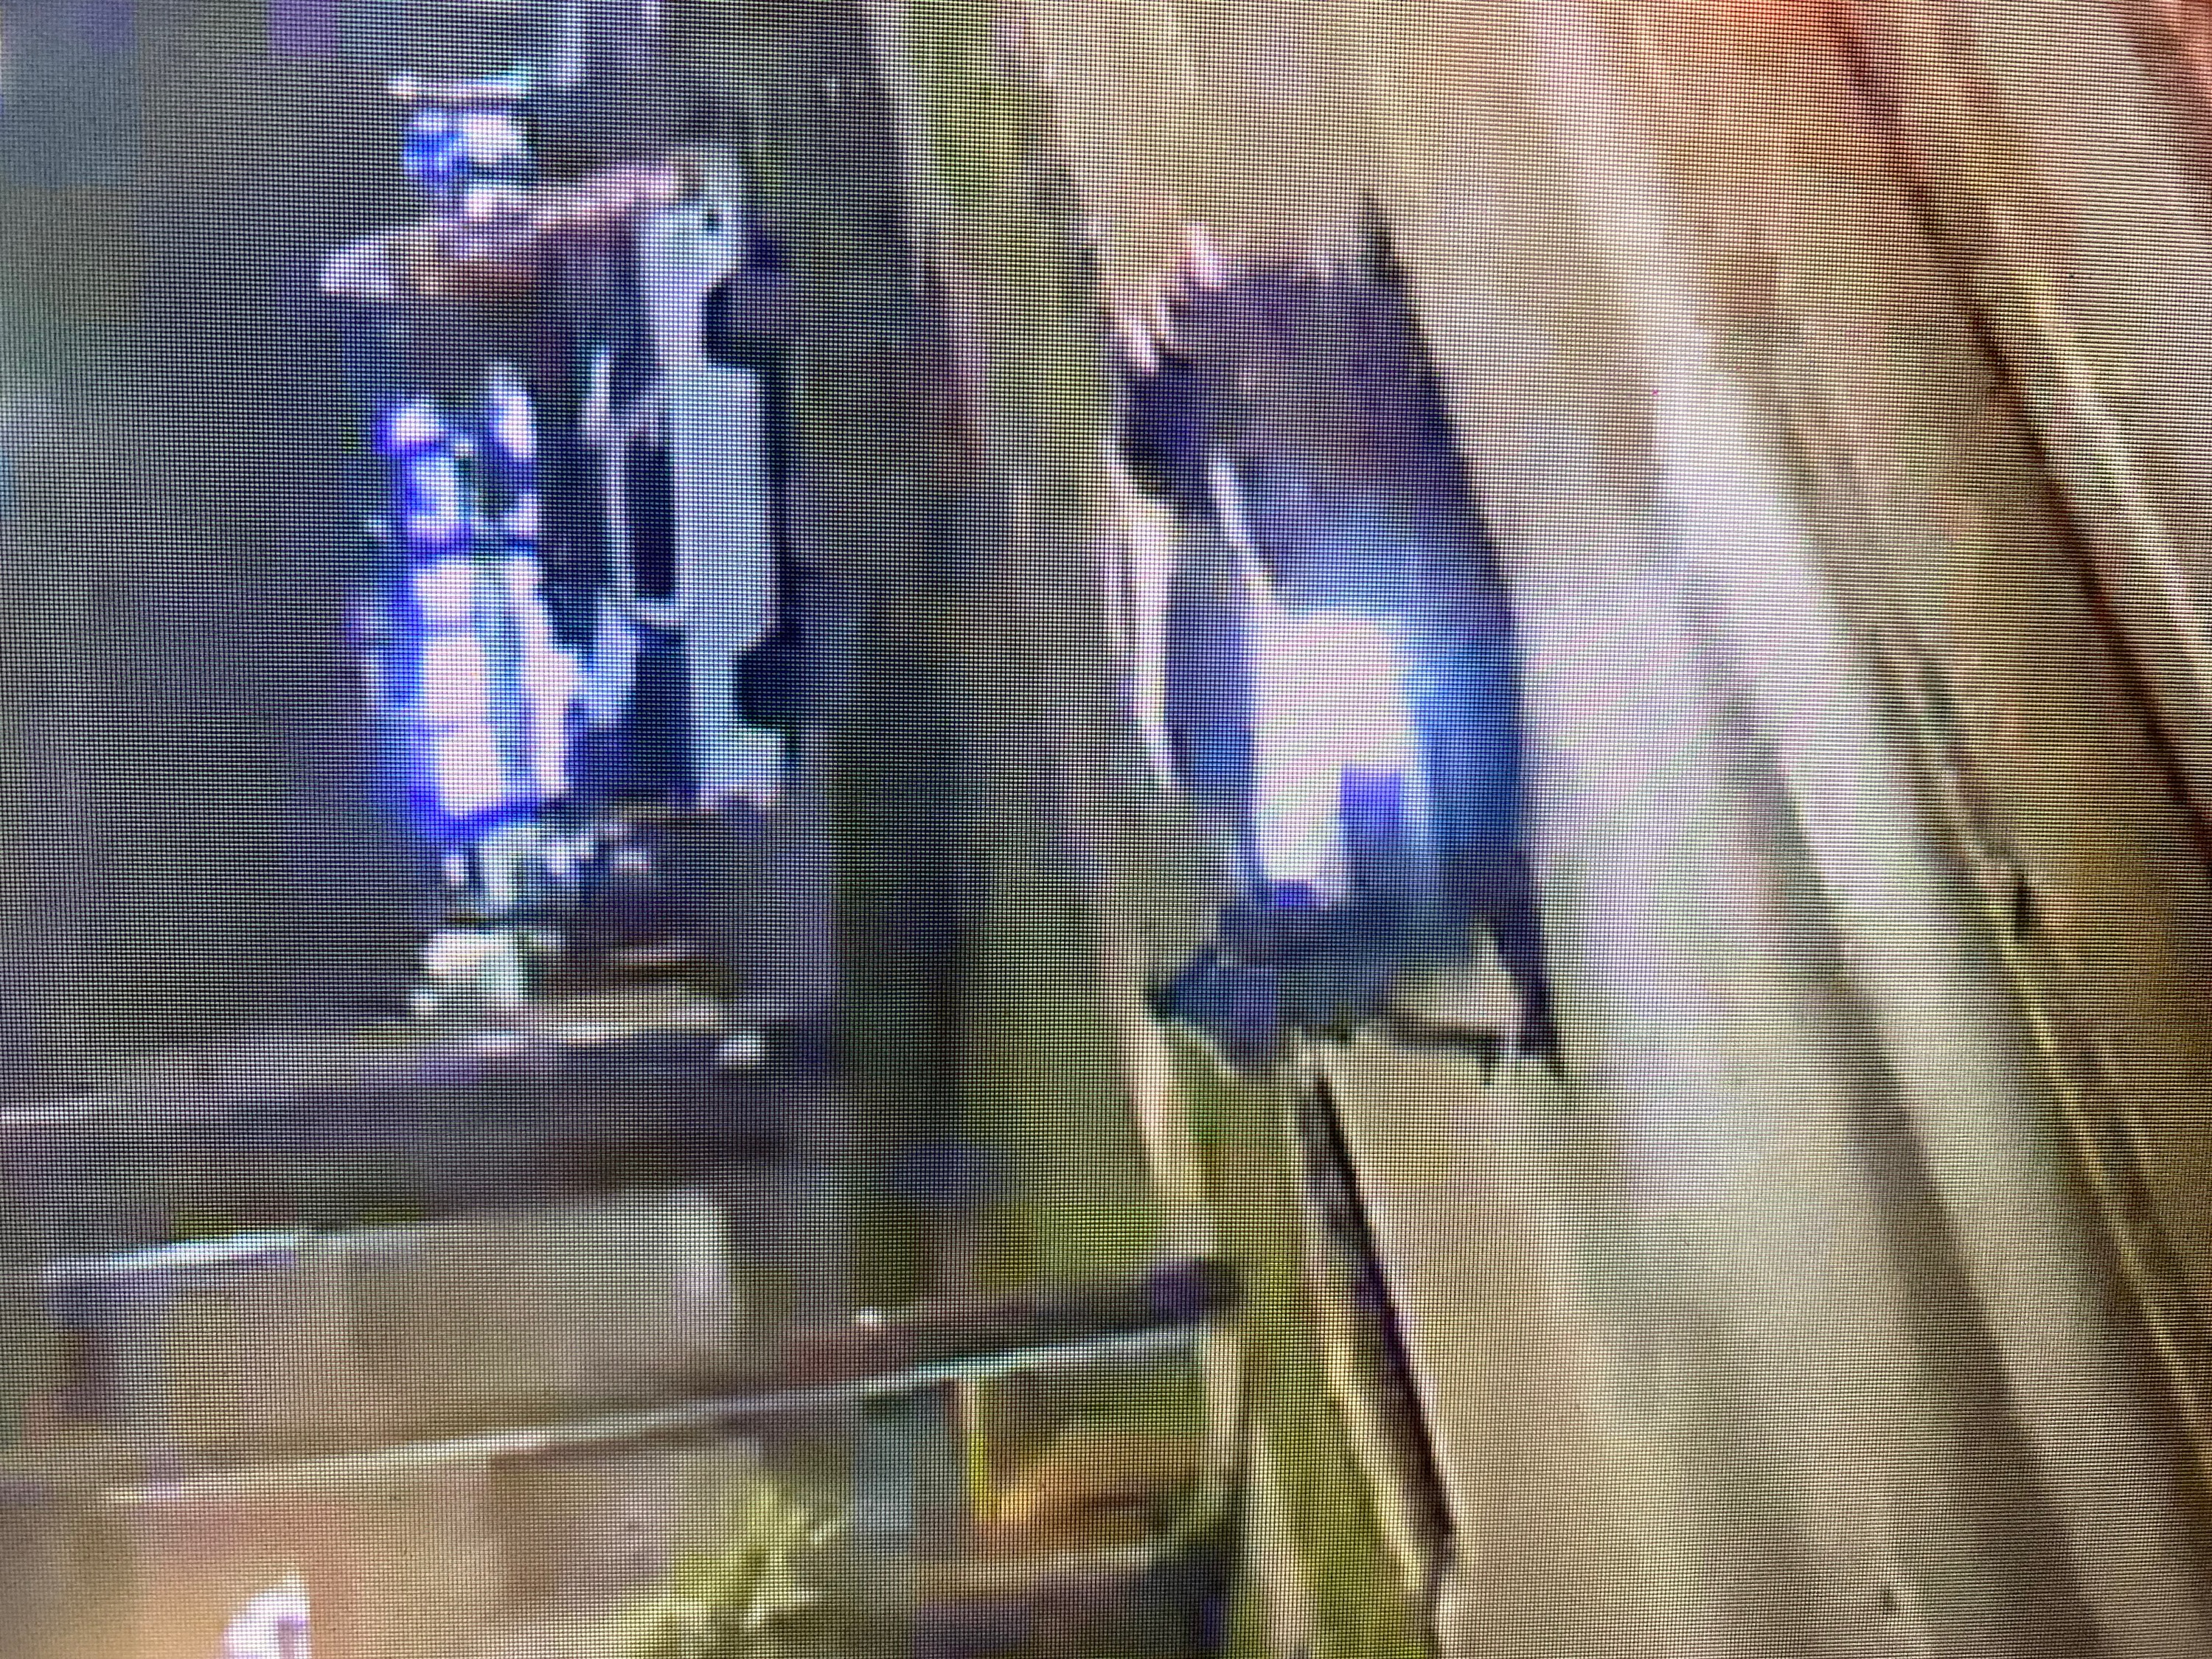 VIDEO: HCSO searching for hit-and-run suspect